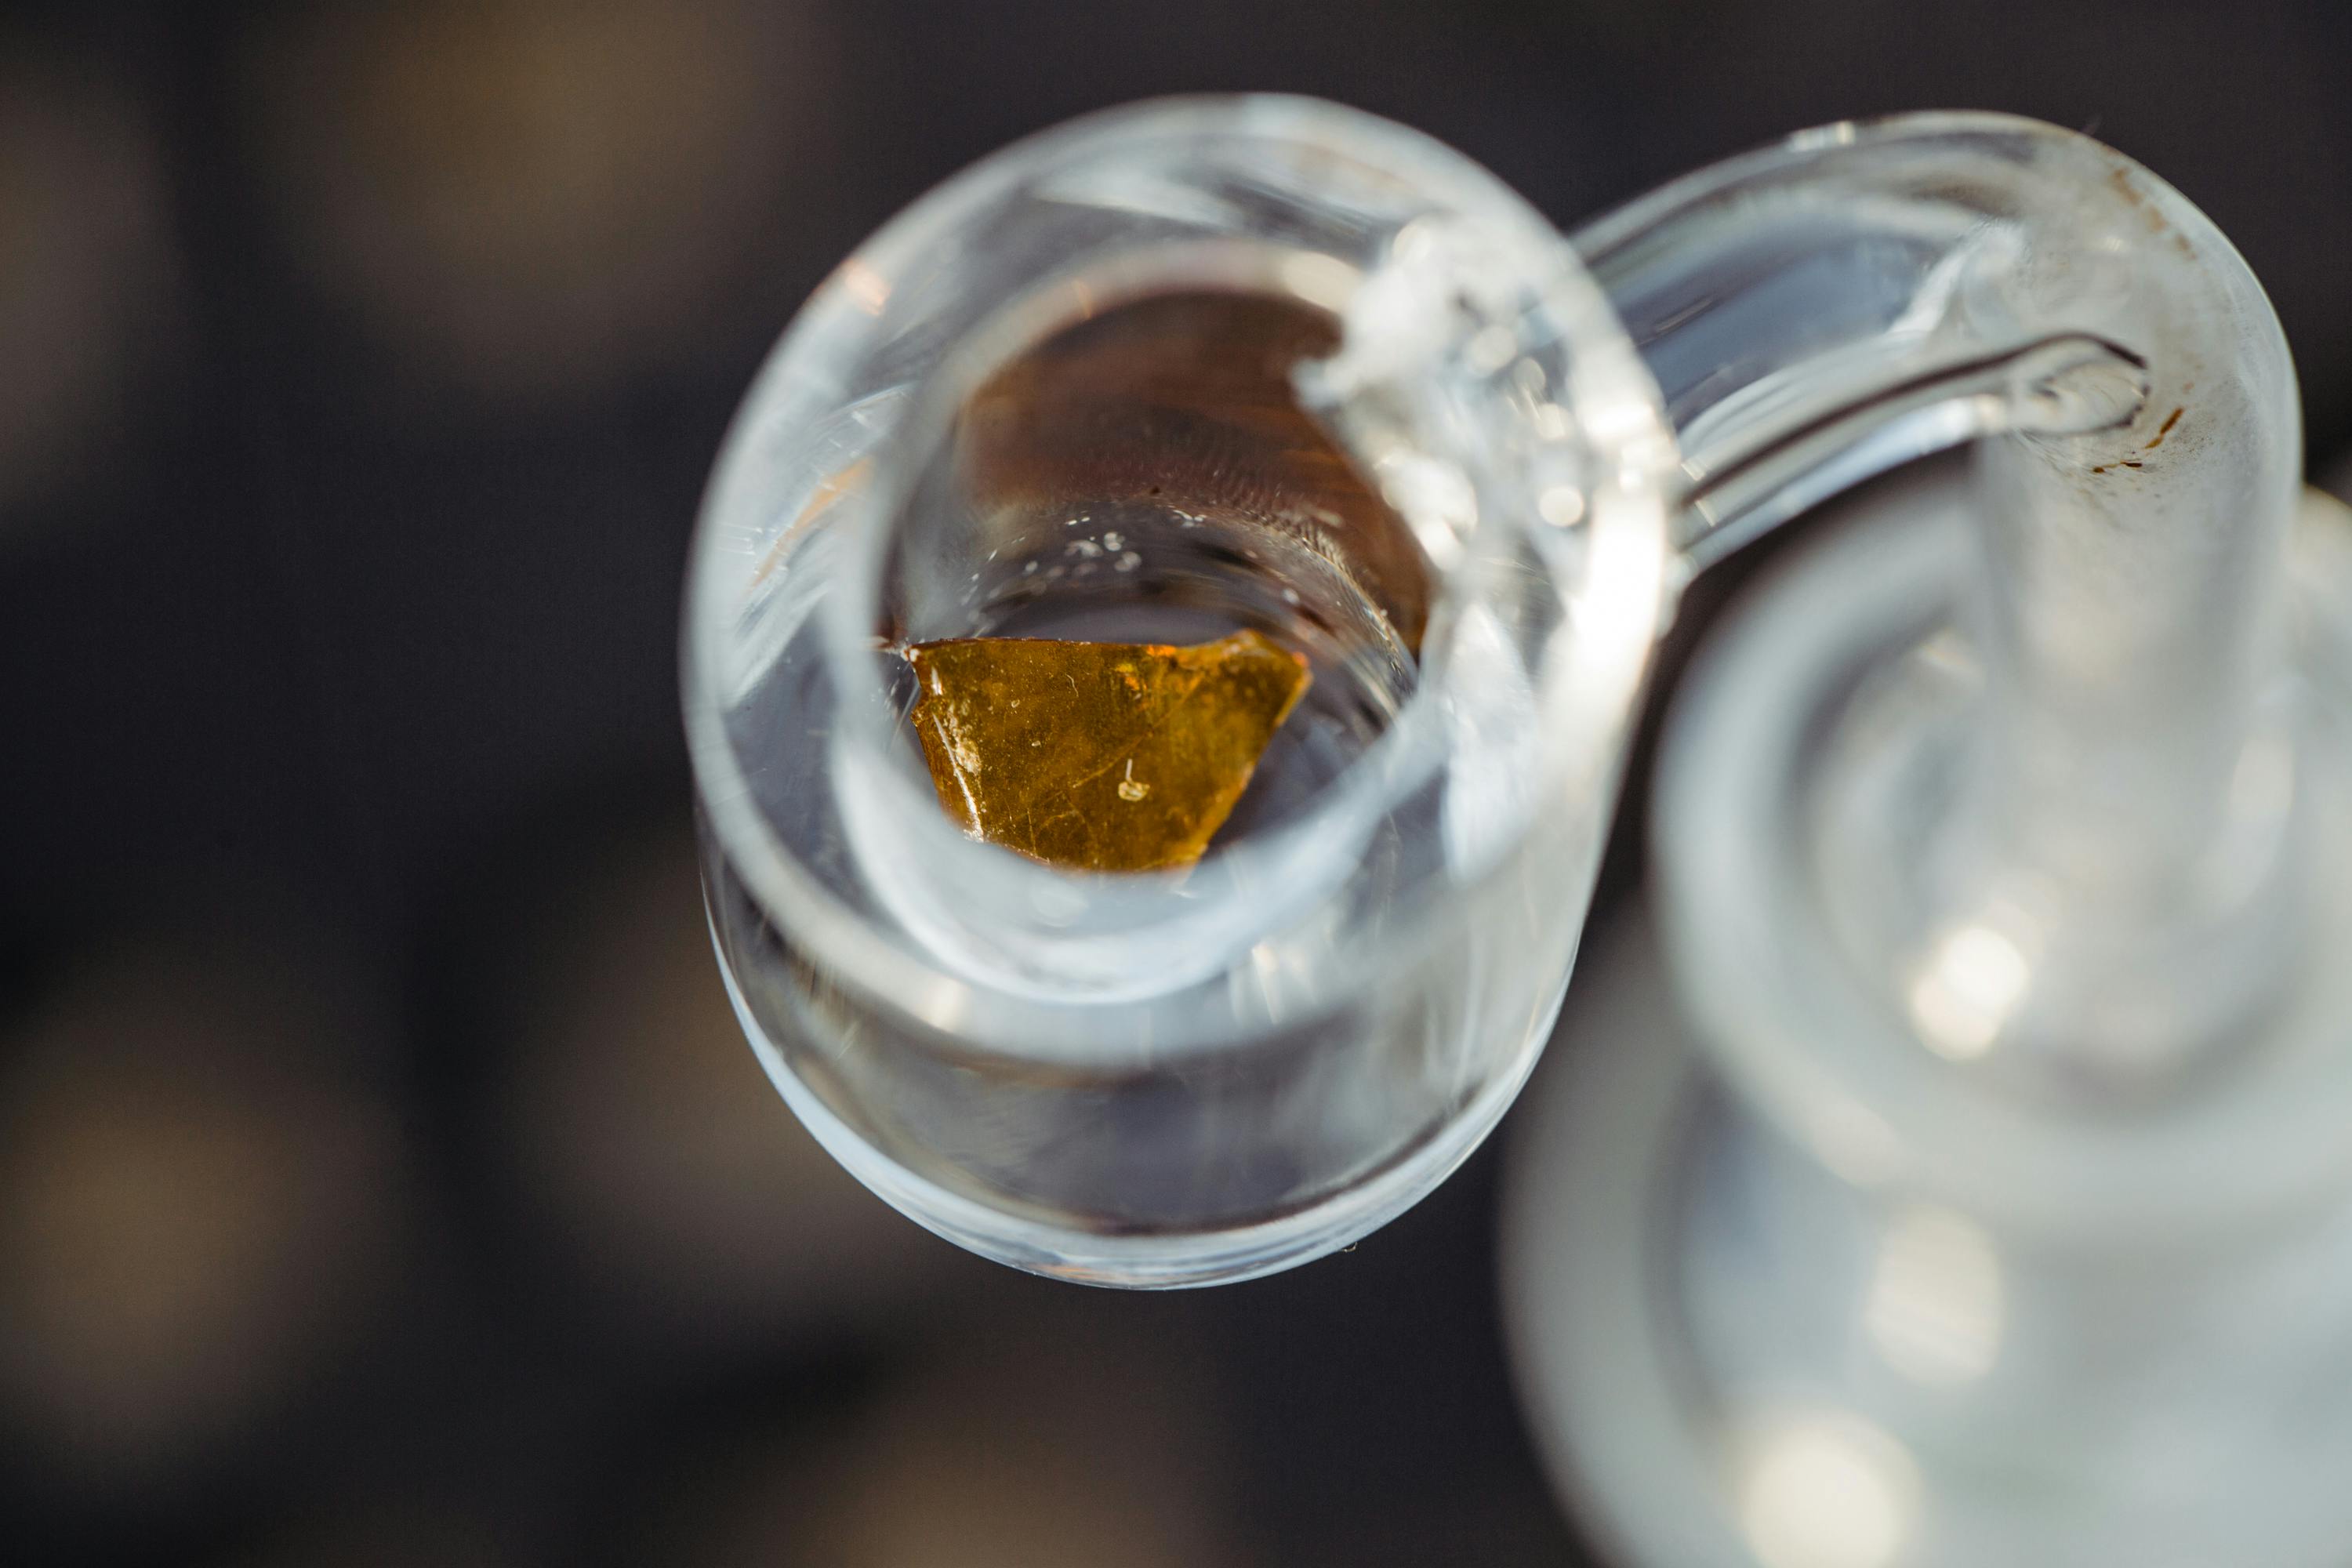 Shatter is displayed in a quartz banger. But what is shatter anyway?